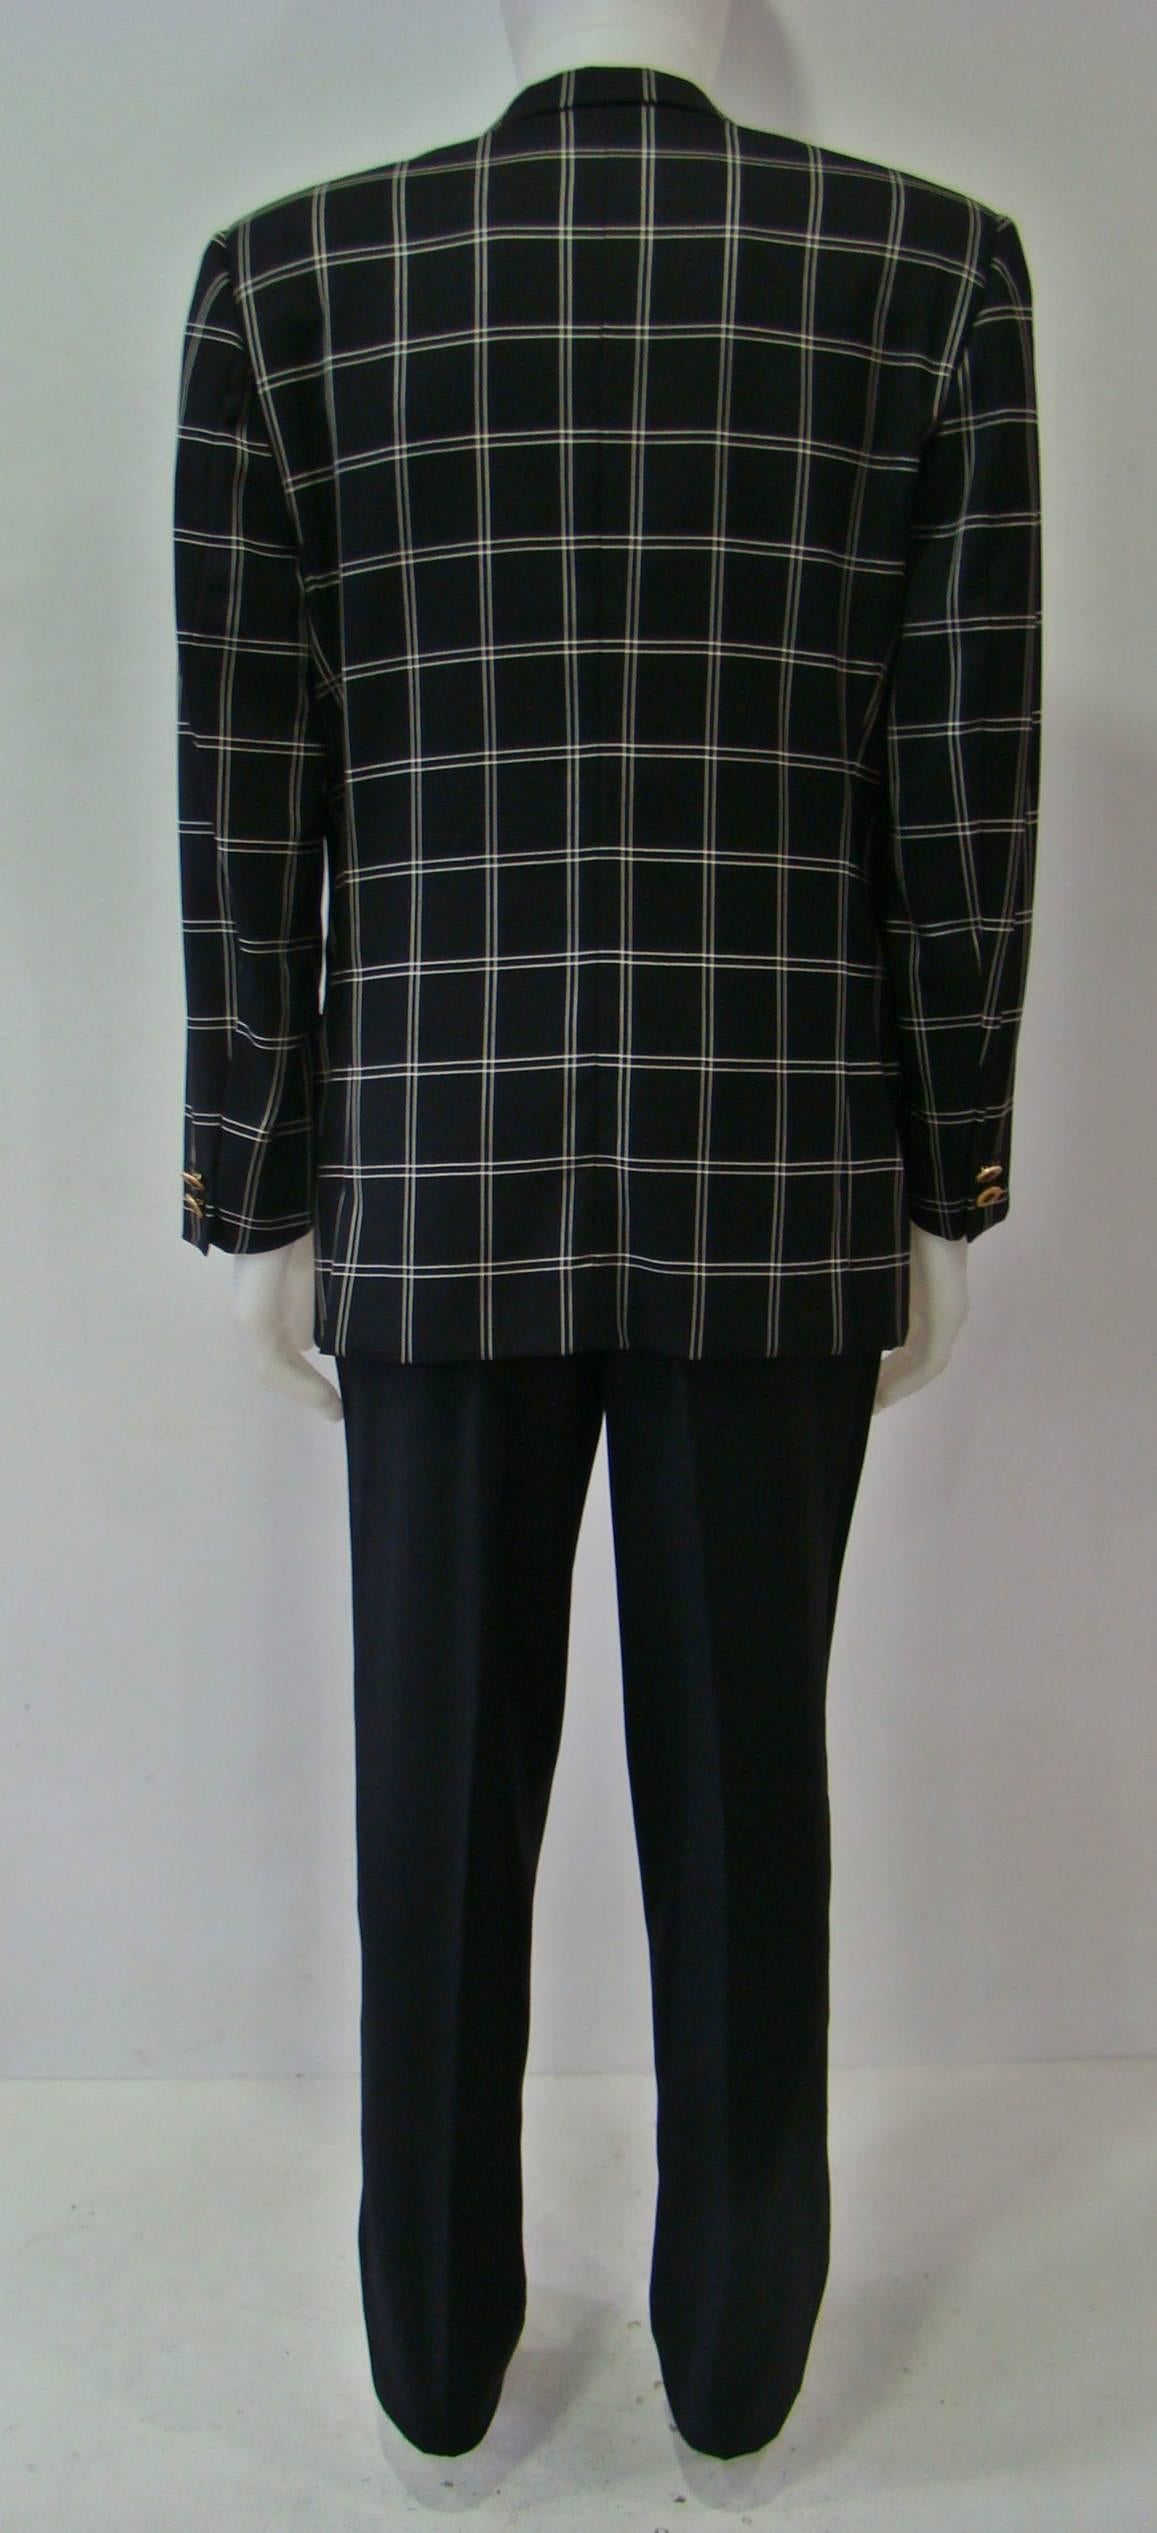 Black Unique Gianni Versace Checked Jacket With Smoking Pants Suit For Sale